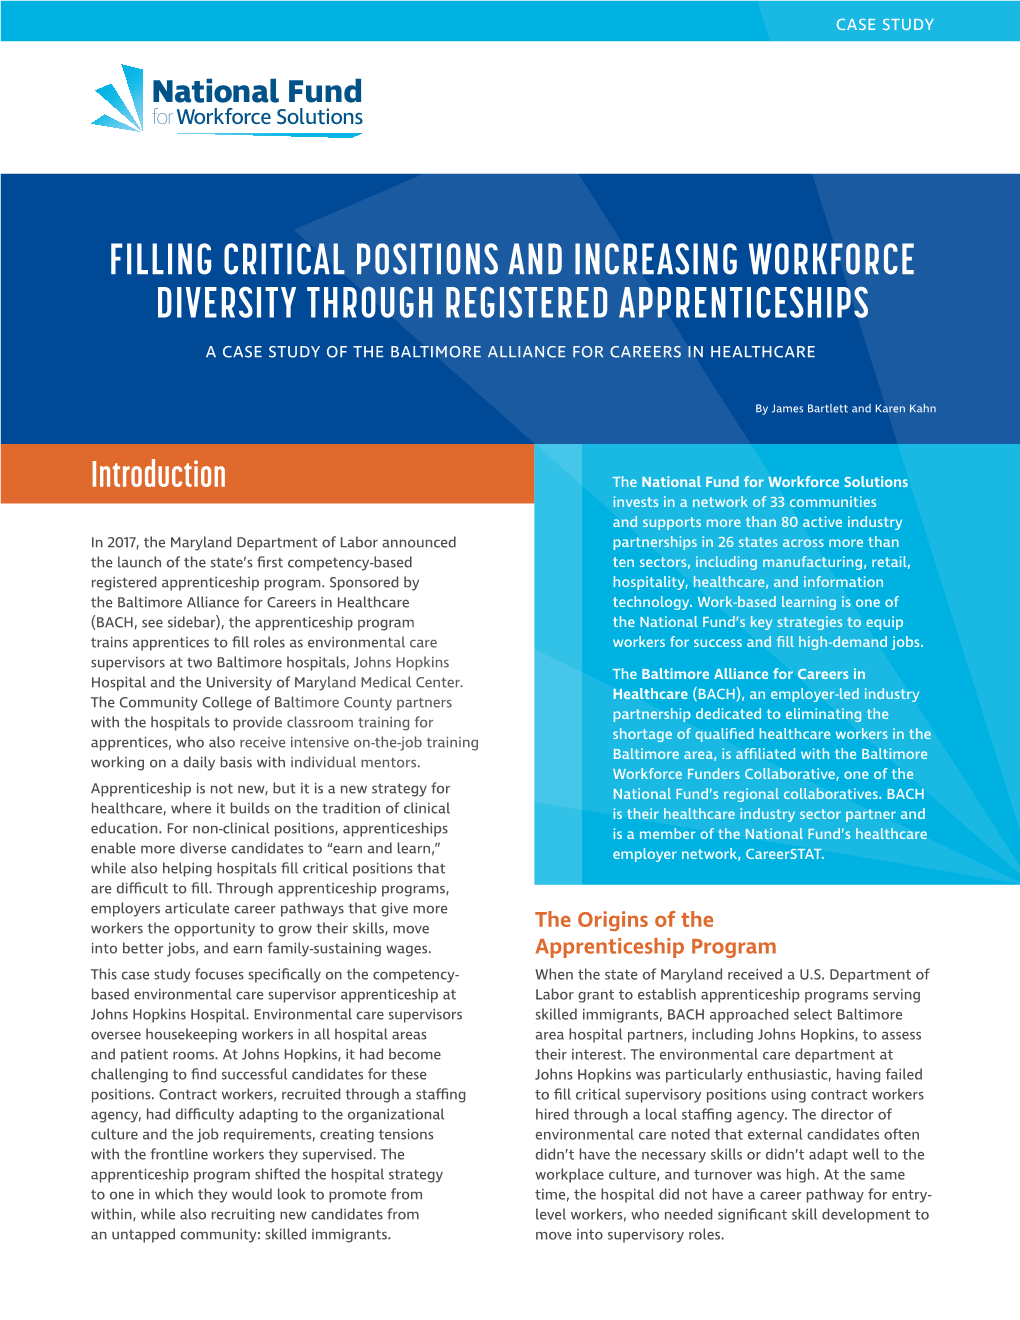 Filling Critical Positions and Increasing Workforce Diversity Through Registered Apprenticeships